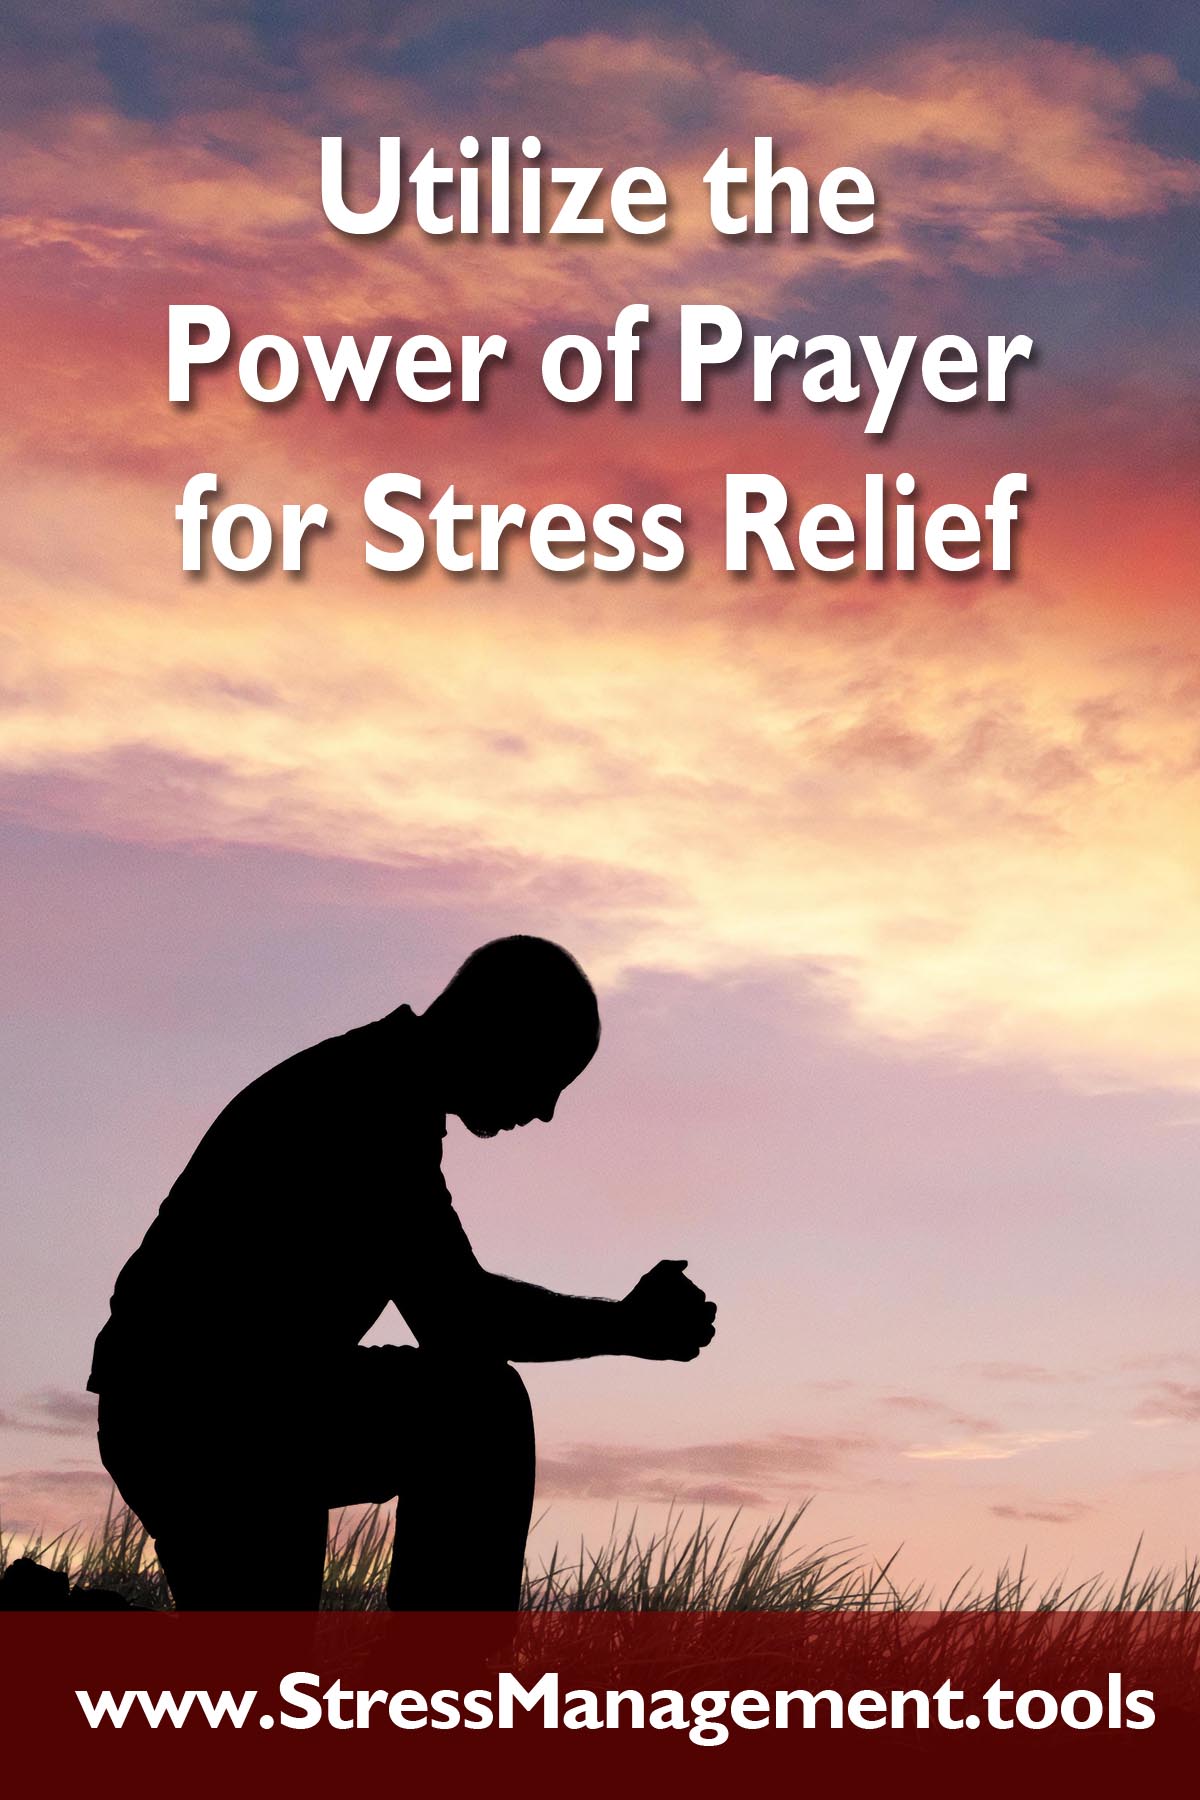 Utilize the Power of Prayer for Stress Relief